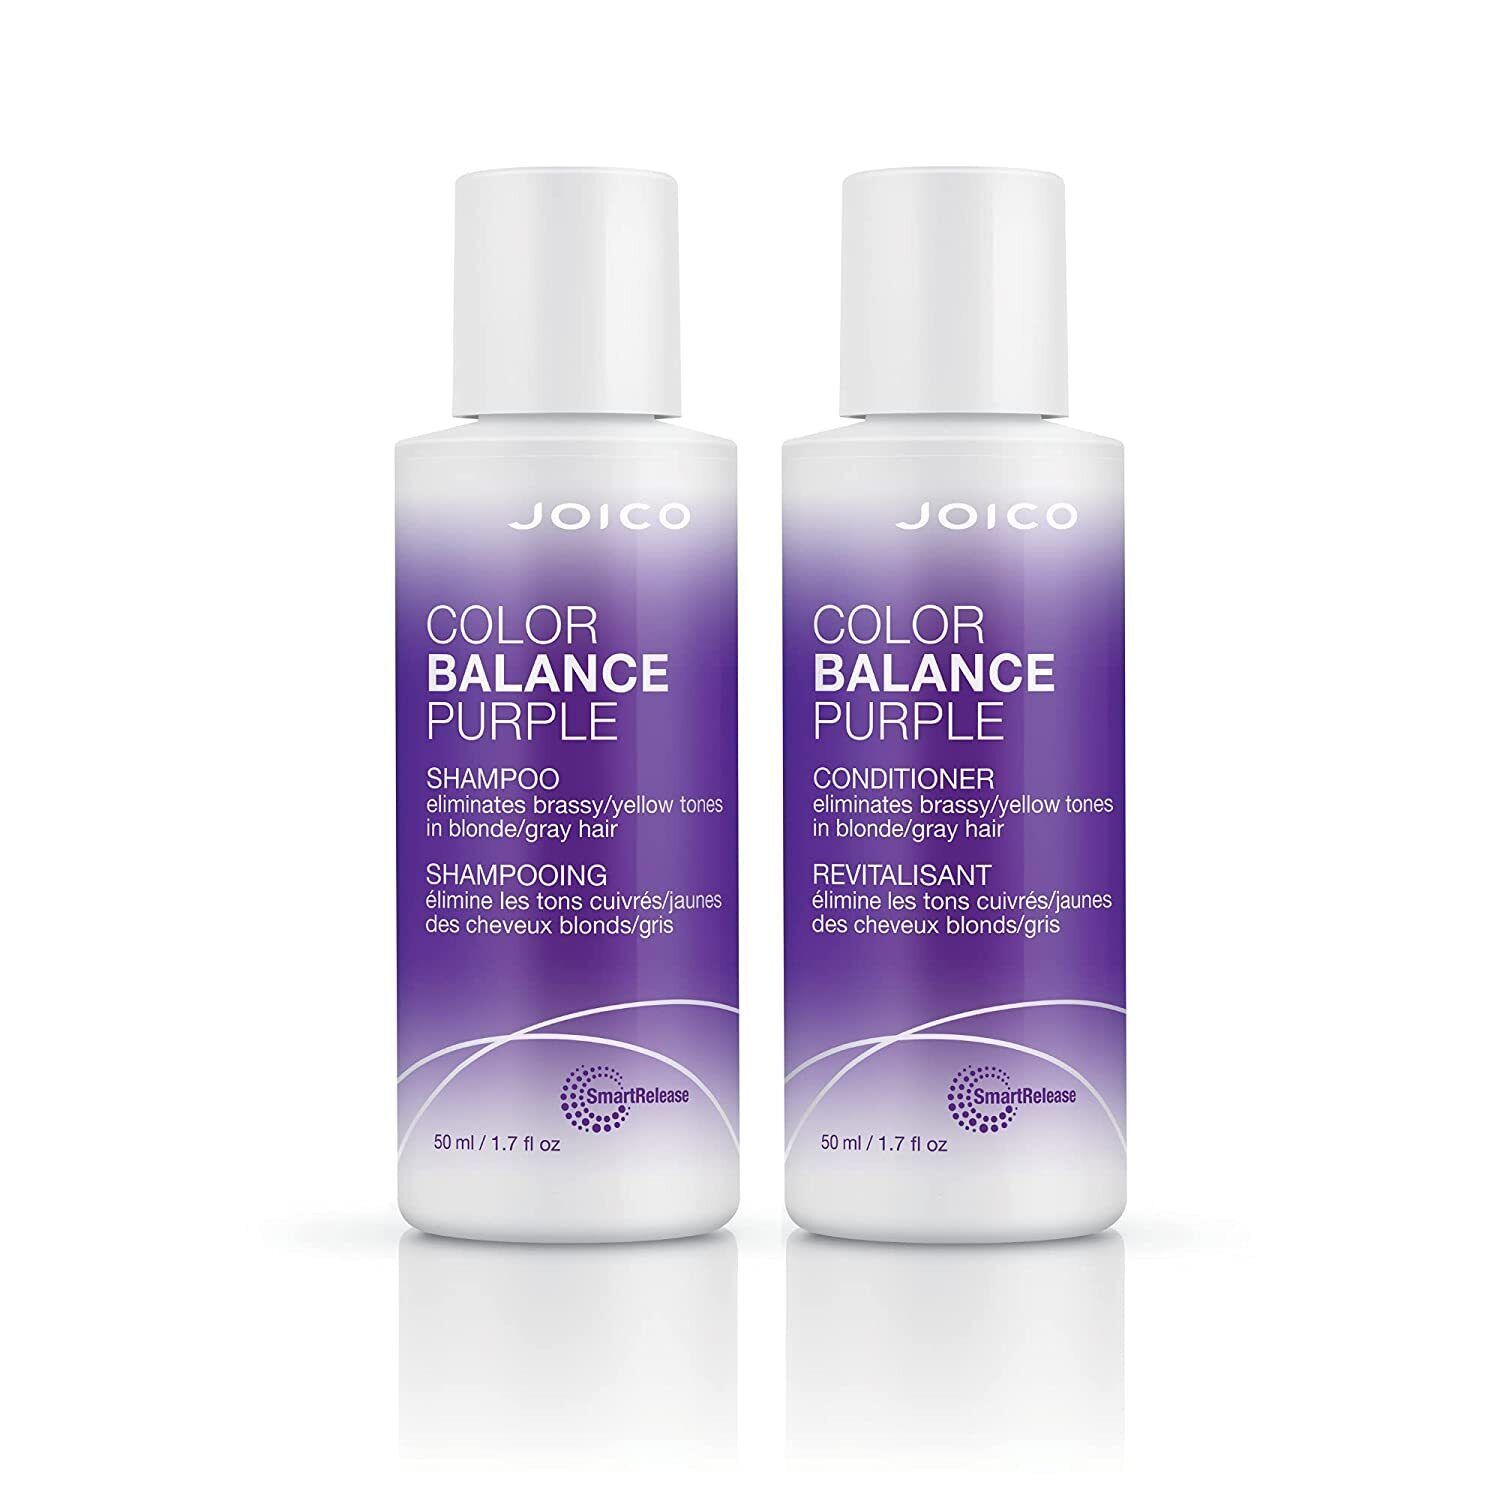 Primary image for Joico Color Balance Purple Shampoo and Conditioner 1.7 oz Travel Duo